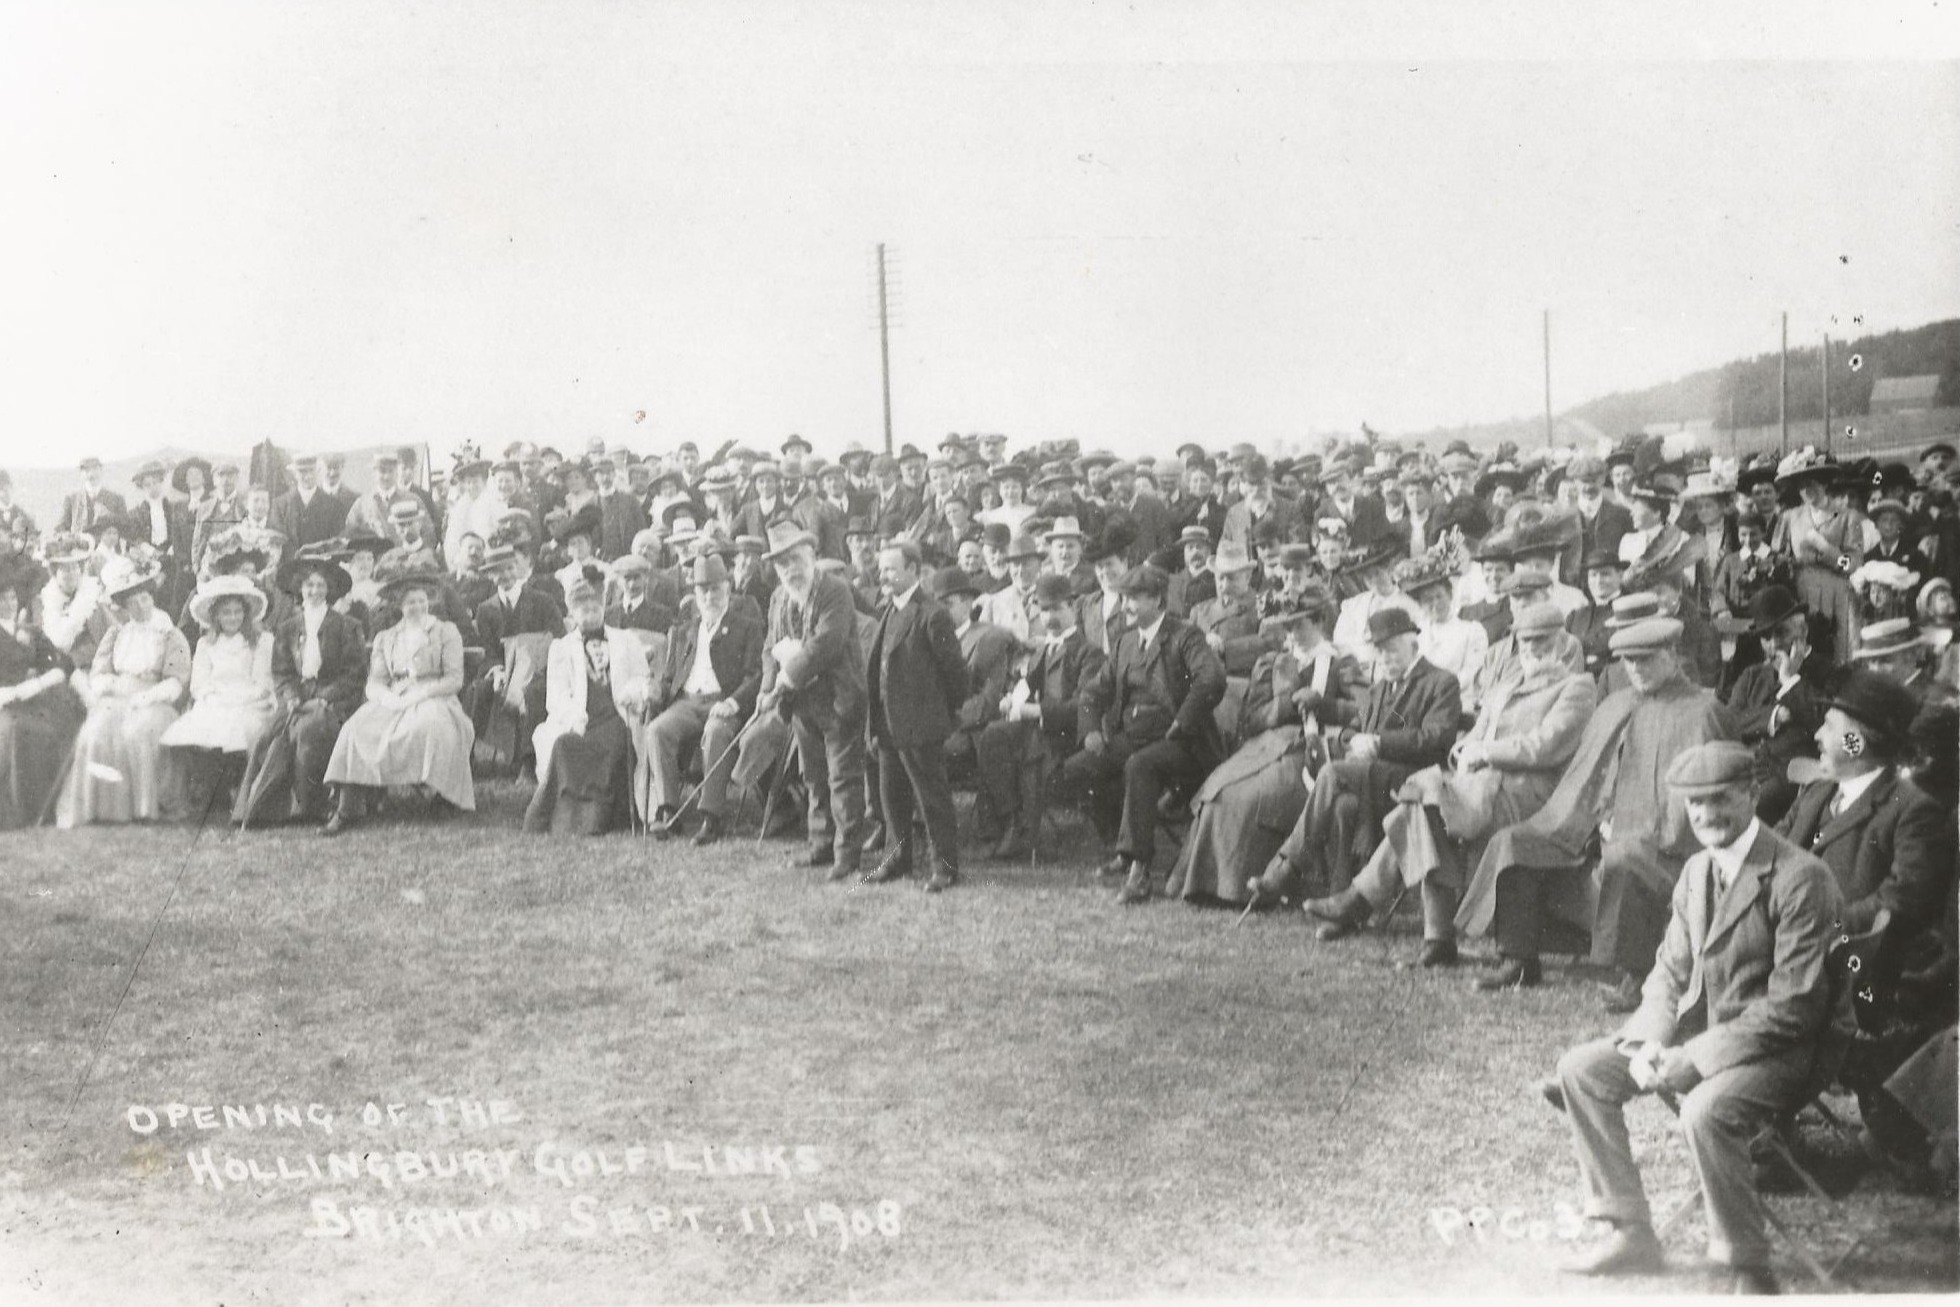 Opening ceremony of the club in 1908